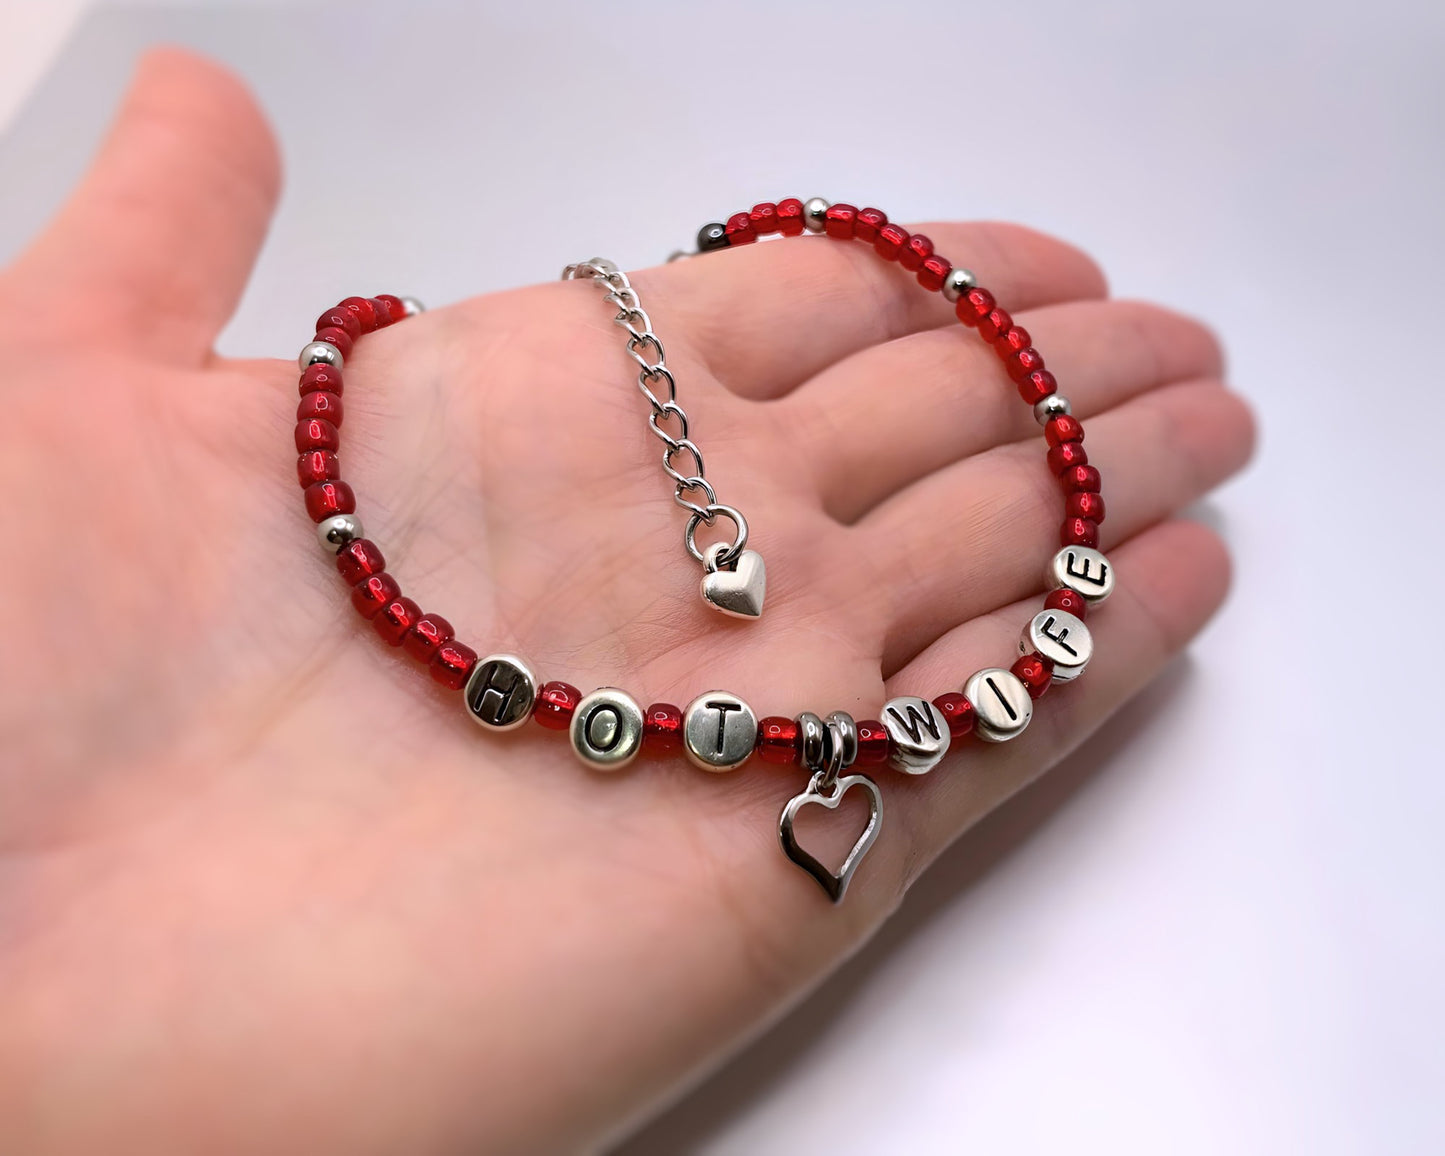 Hotwife Anklet / Bracelet with Heart Charm